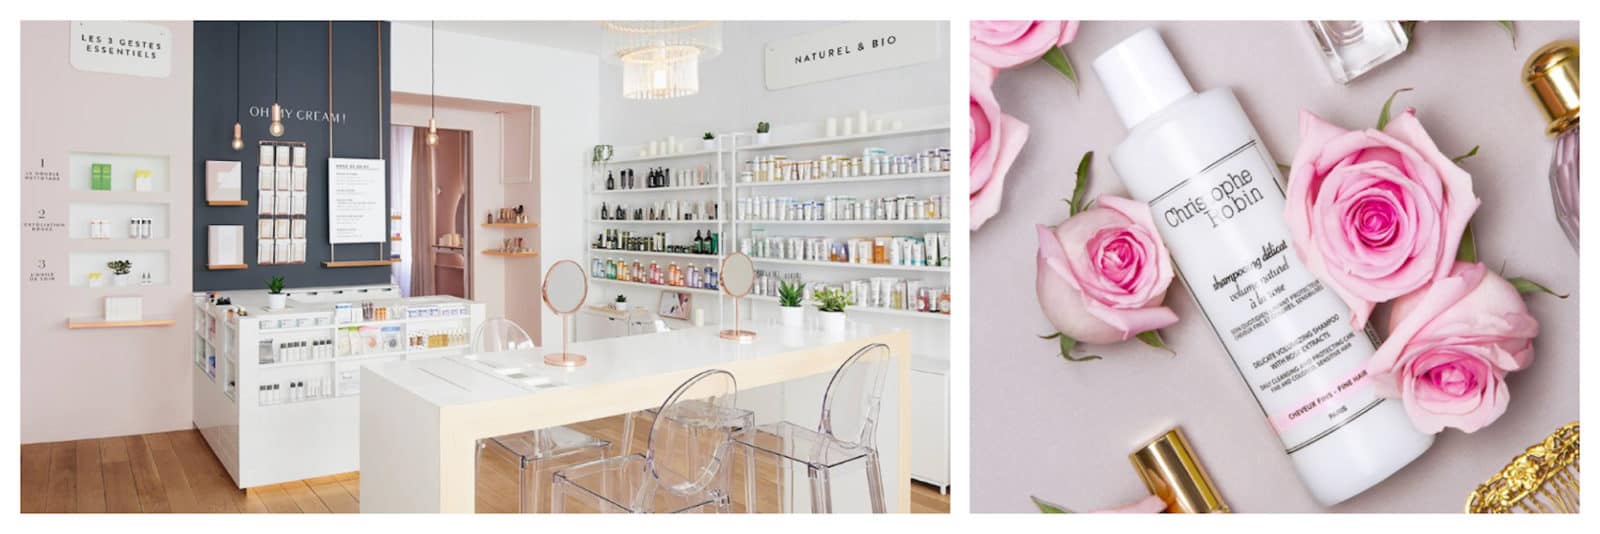 Oh My Cream! French beauty brand store interiors (left). French hair colorist Christophe Robin's beauty products top our list as they are natural and smell great, like this bottle of soft 'Shampooing délicat' (right).